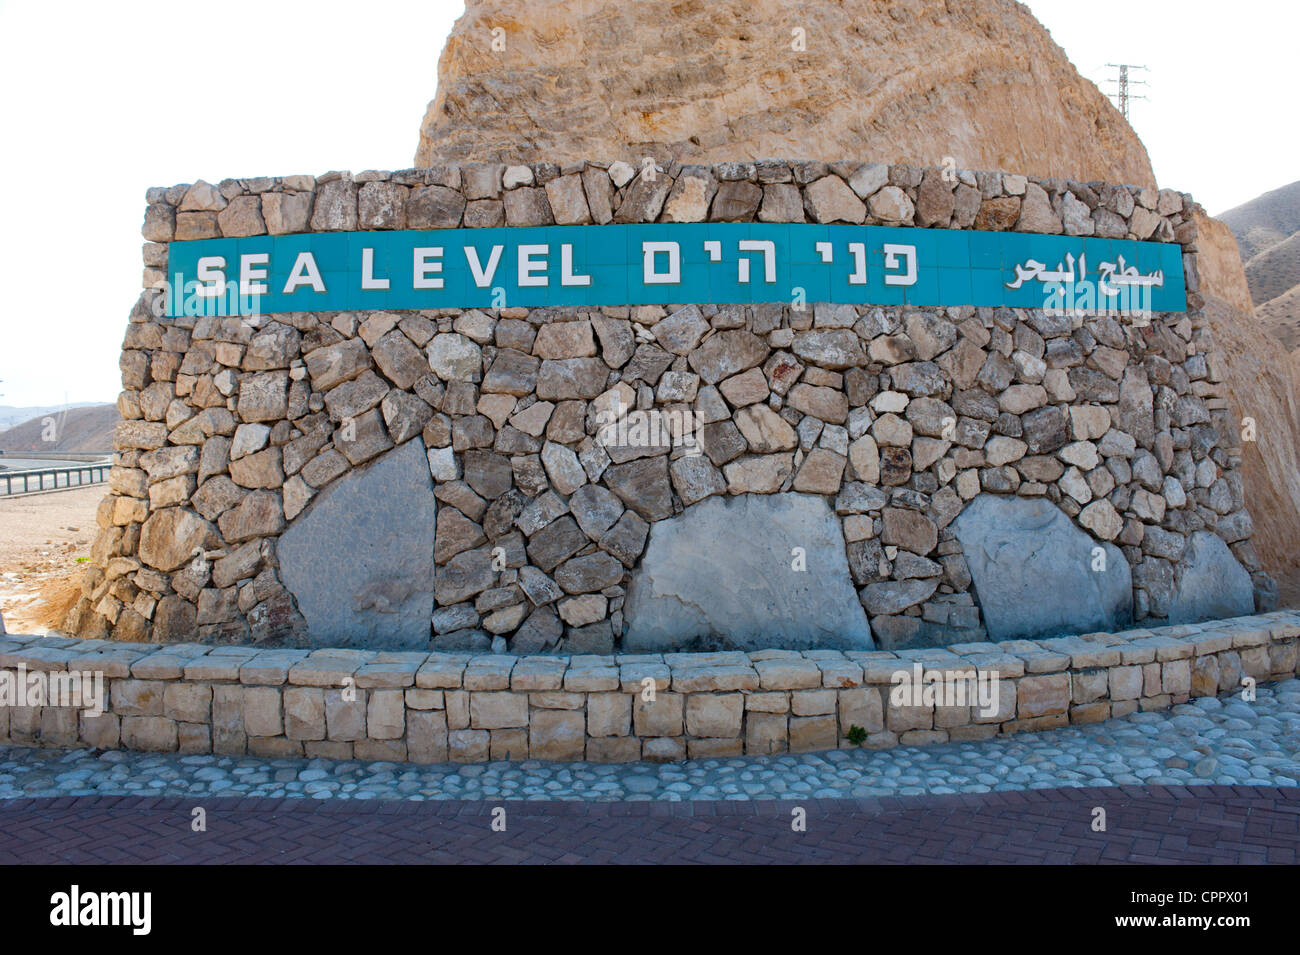 Middle East Israel monument marker for Sea Level near the Dead Sea Stock Photo